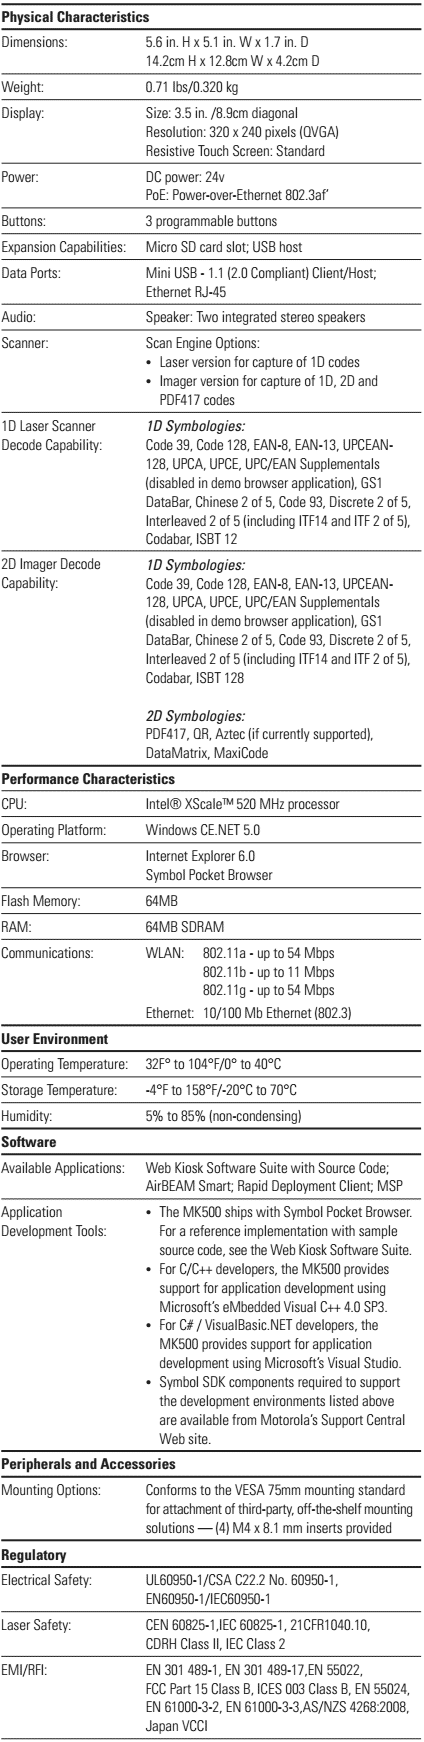 MK500 Specifications